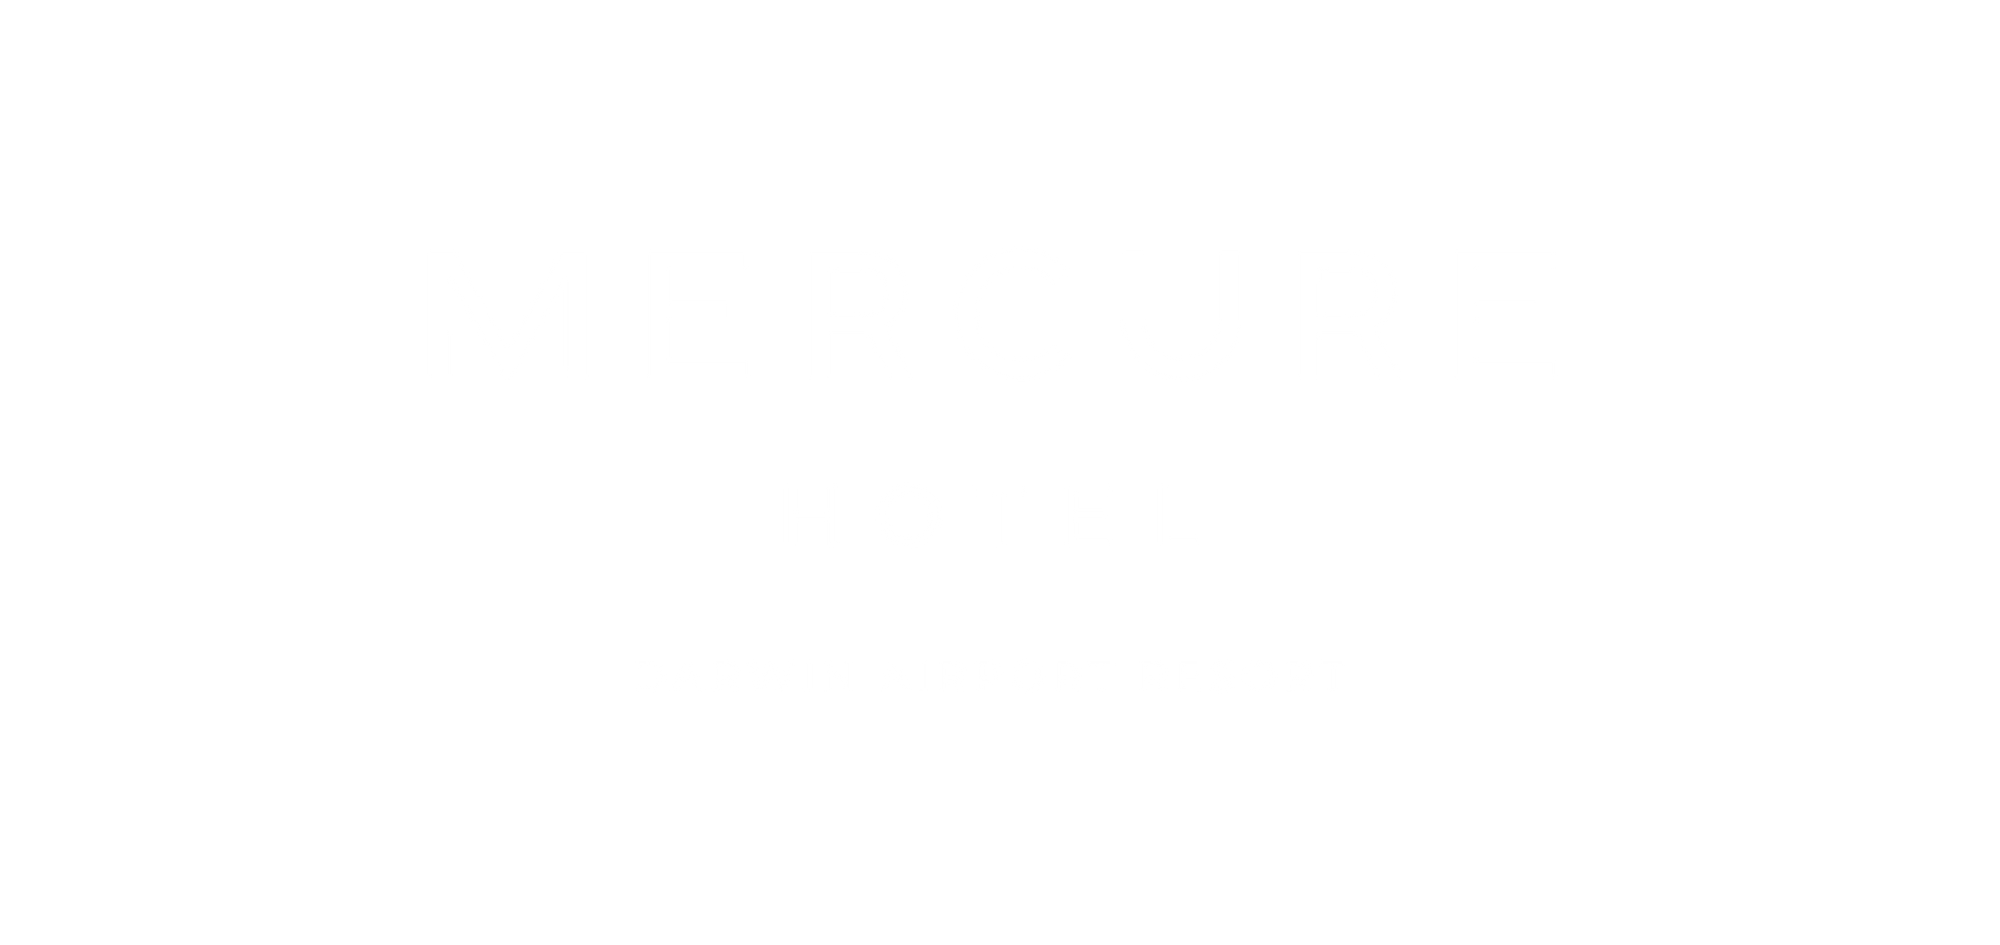 Official white logo of Mercure Hotel of Novotel Darwin Airport